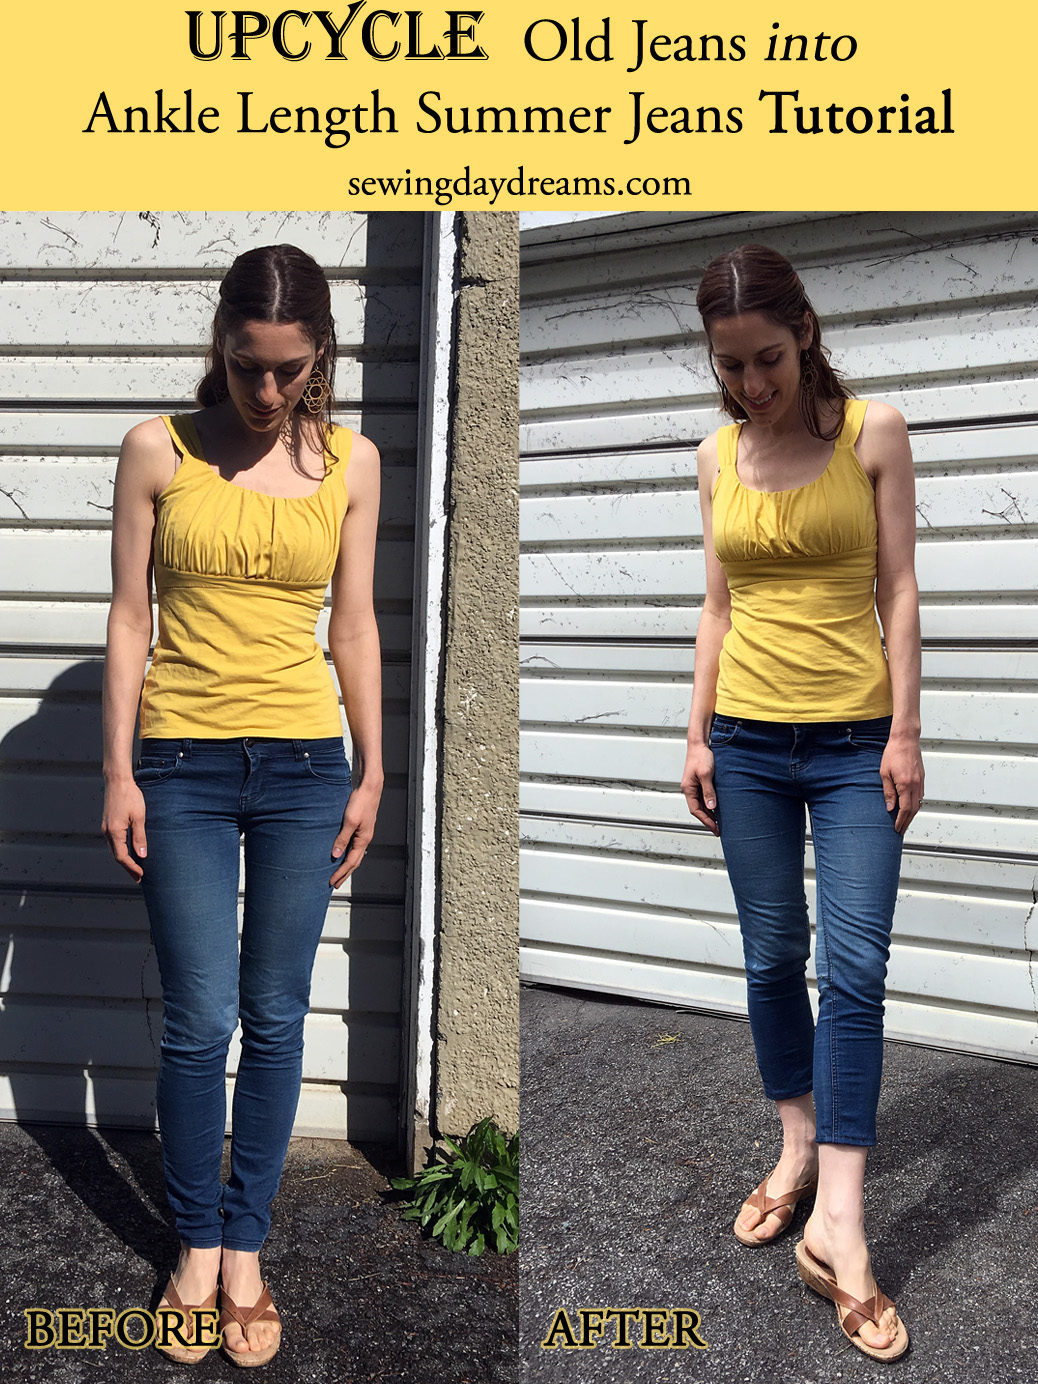 DIY - Upcycle Old Jeans into Ankle Length Summer Jeans Tutorial